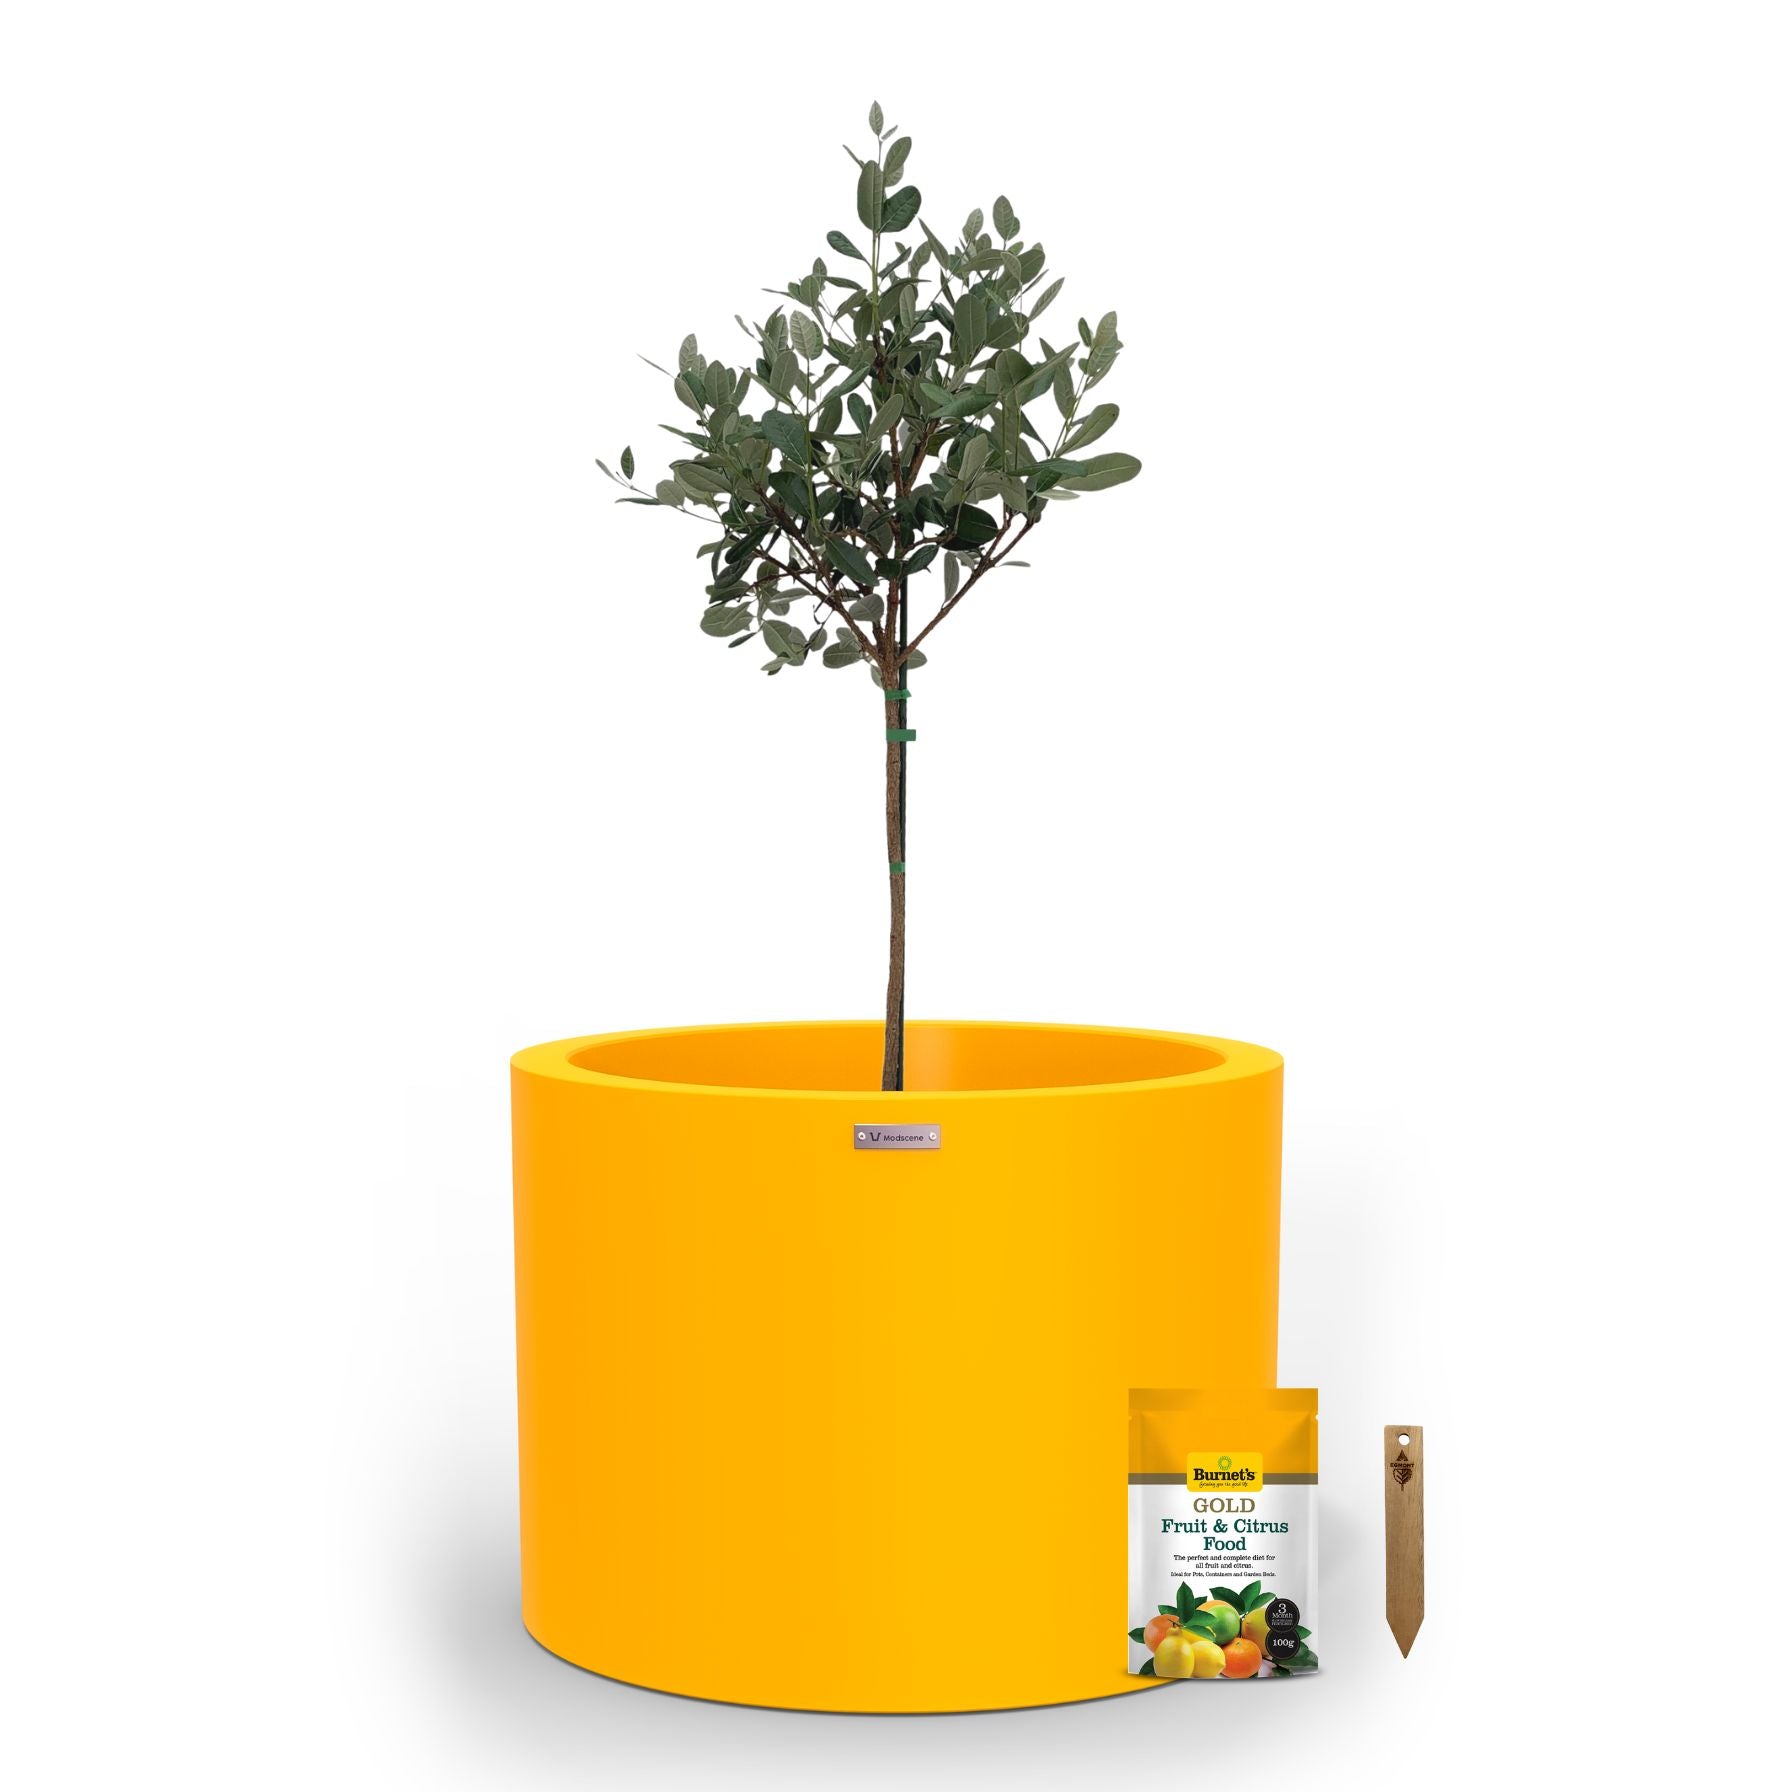 A large yellow planter pot used to plant fruit trees. 